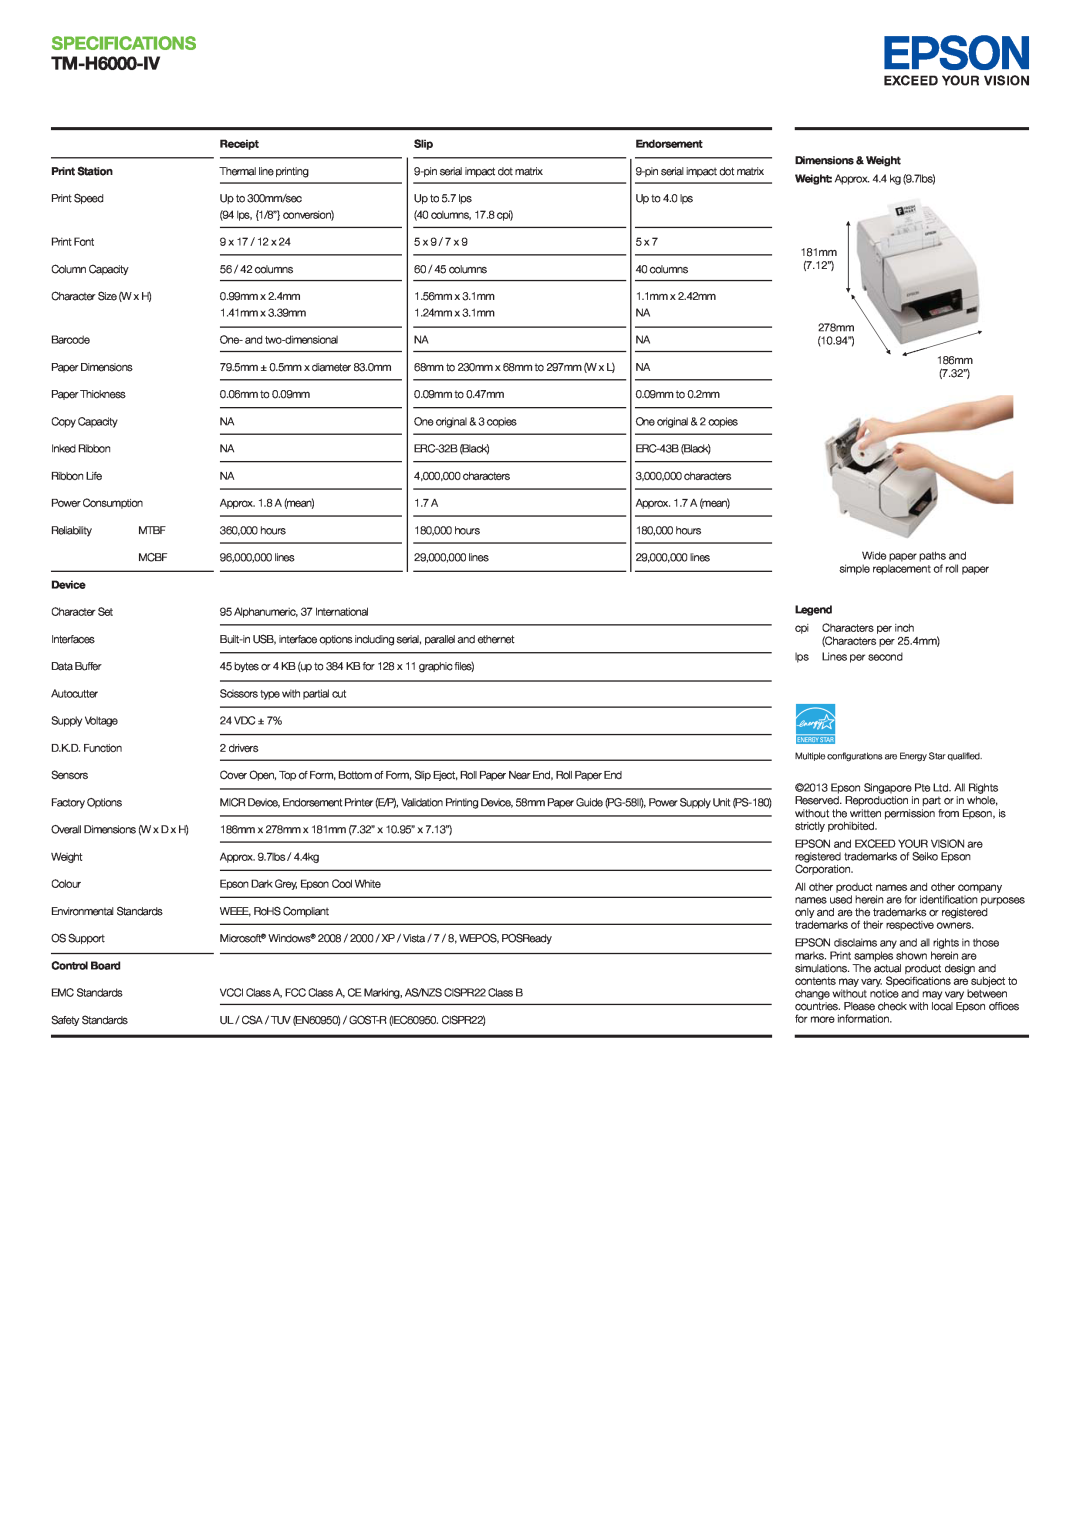 Epson TH-H6000-IV Specifications, TM-H6000-IV, Receipt, Slip, Dimensions & Weight, Print Station, Device, Control Board 